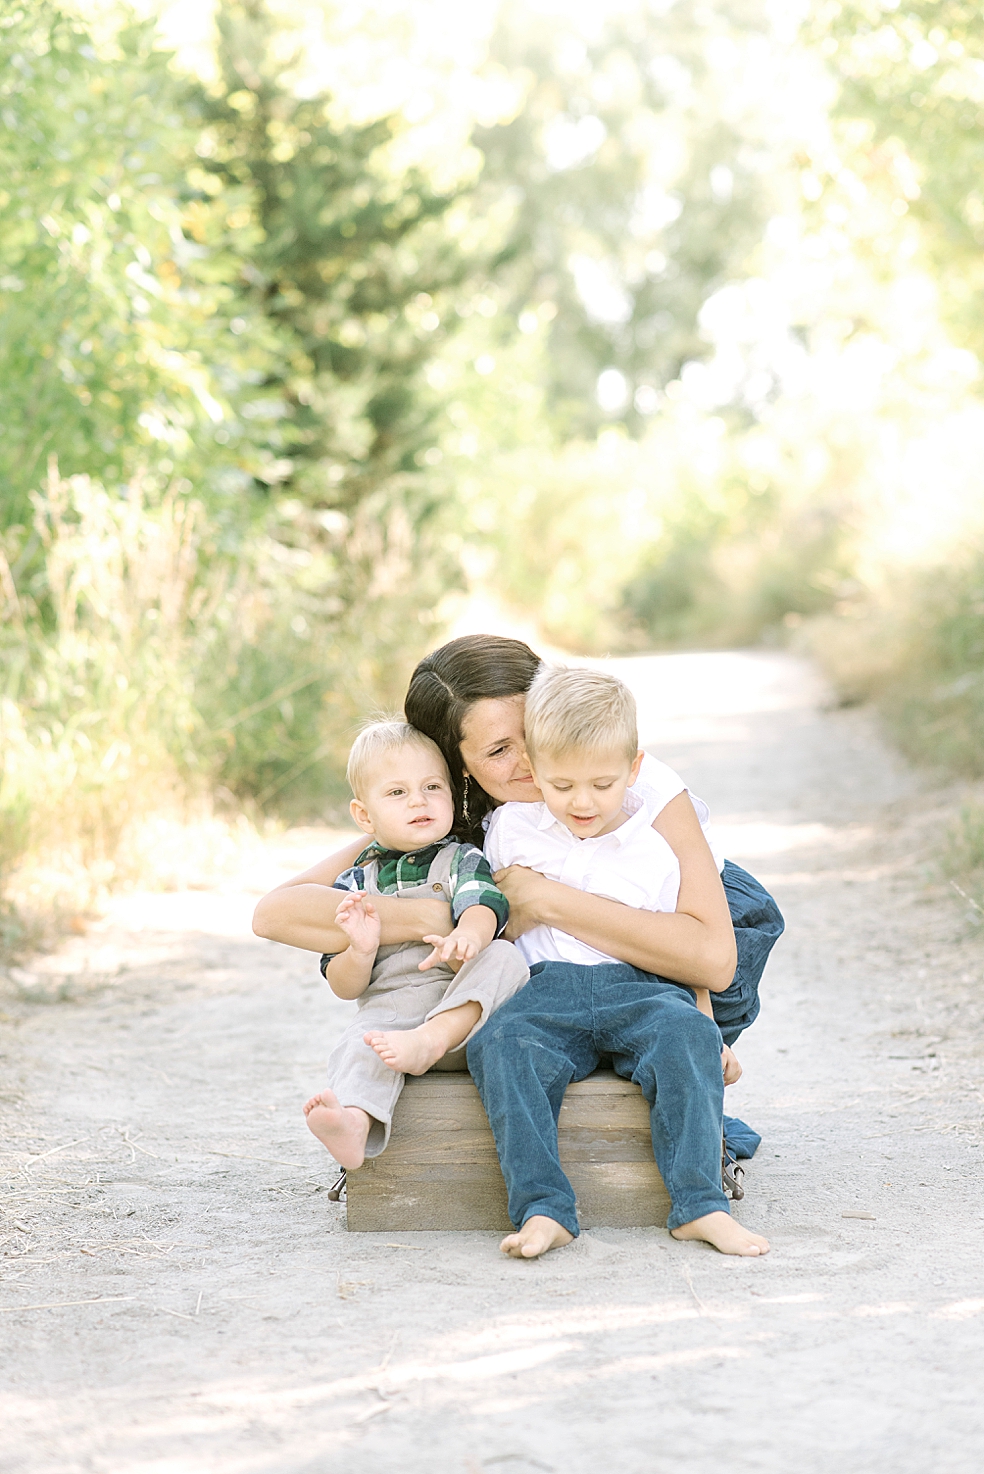 Mom snuggling with her two little boys | Photo by Jessica Lee Photography